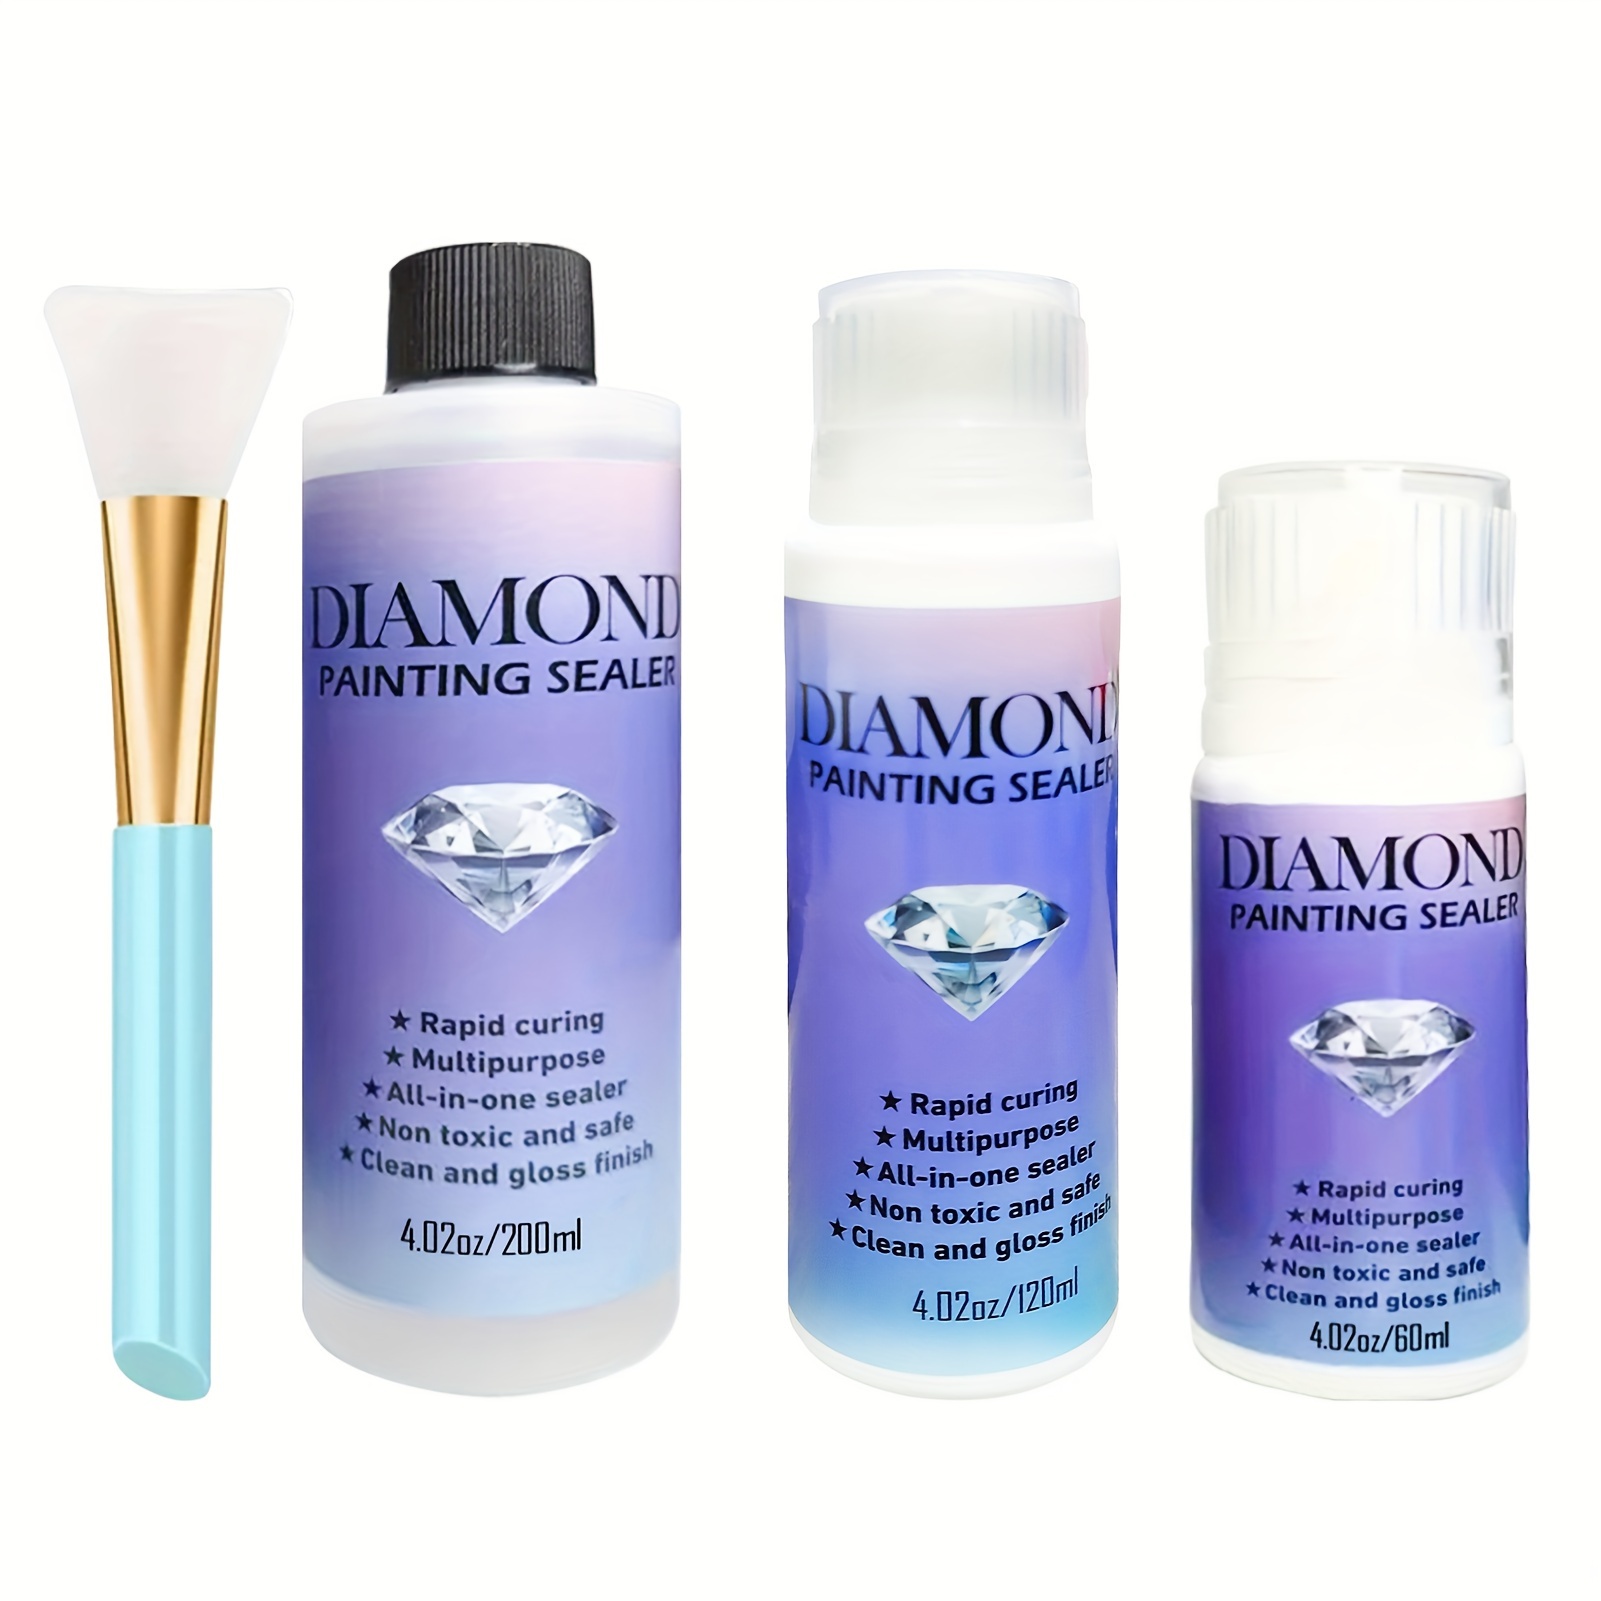 Diamond Painting Sealing Glue 120ml, Diy Art Sealant With Sponge Head For  5d Diamond Painting Kit Accessories. Designed To Preserve The Shiny Effect